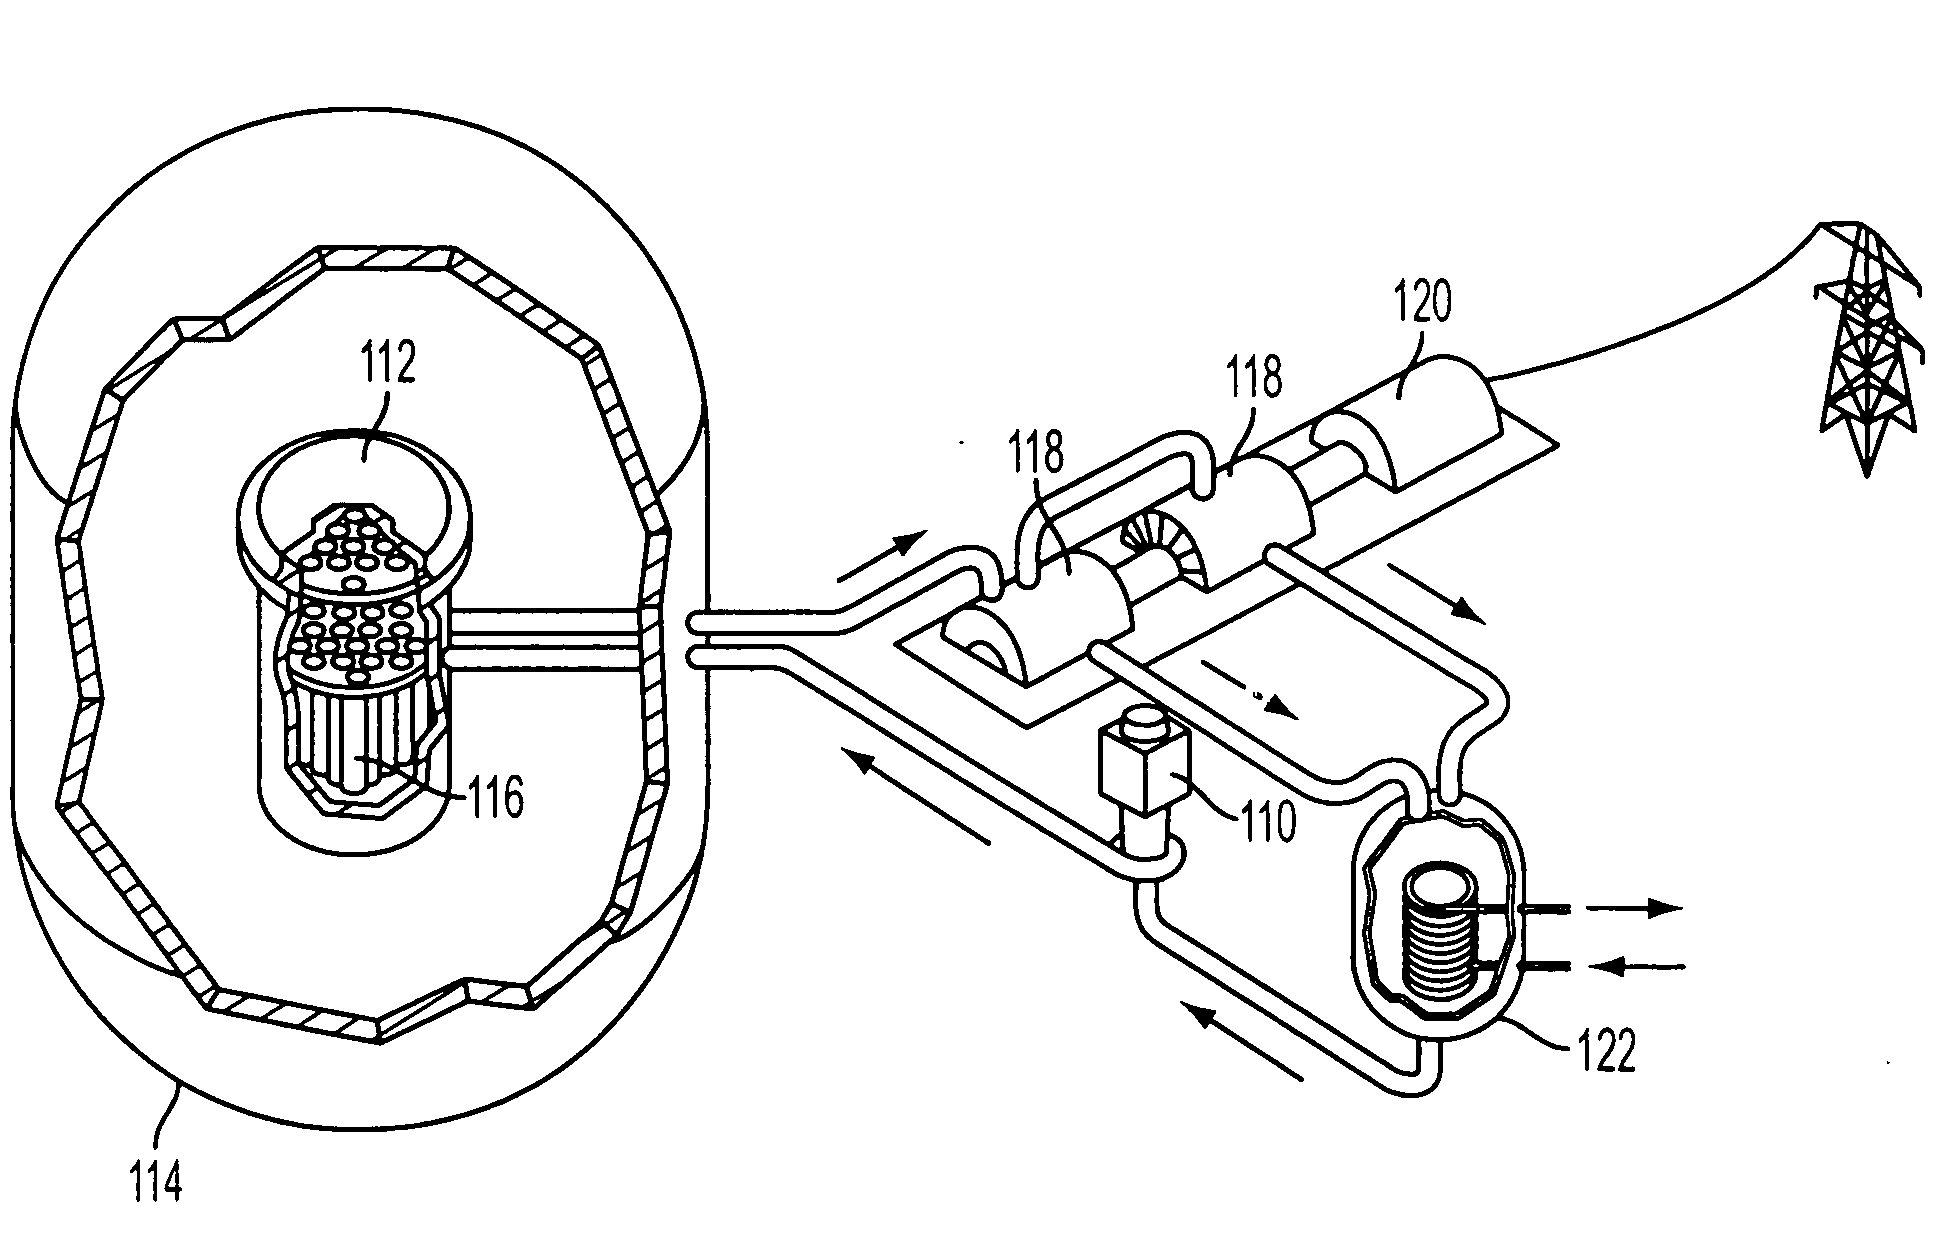 Method for improving energy output of a nuclear reactor, method for determining natural uranium blanket layer for a fuel bundle, and a fuel bundle having a variable blanket layer